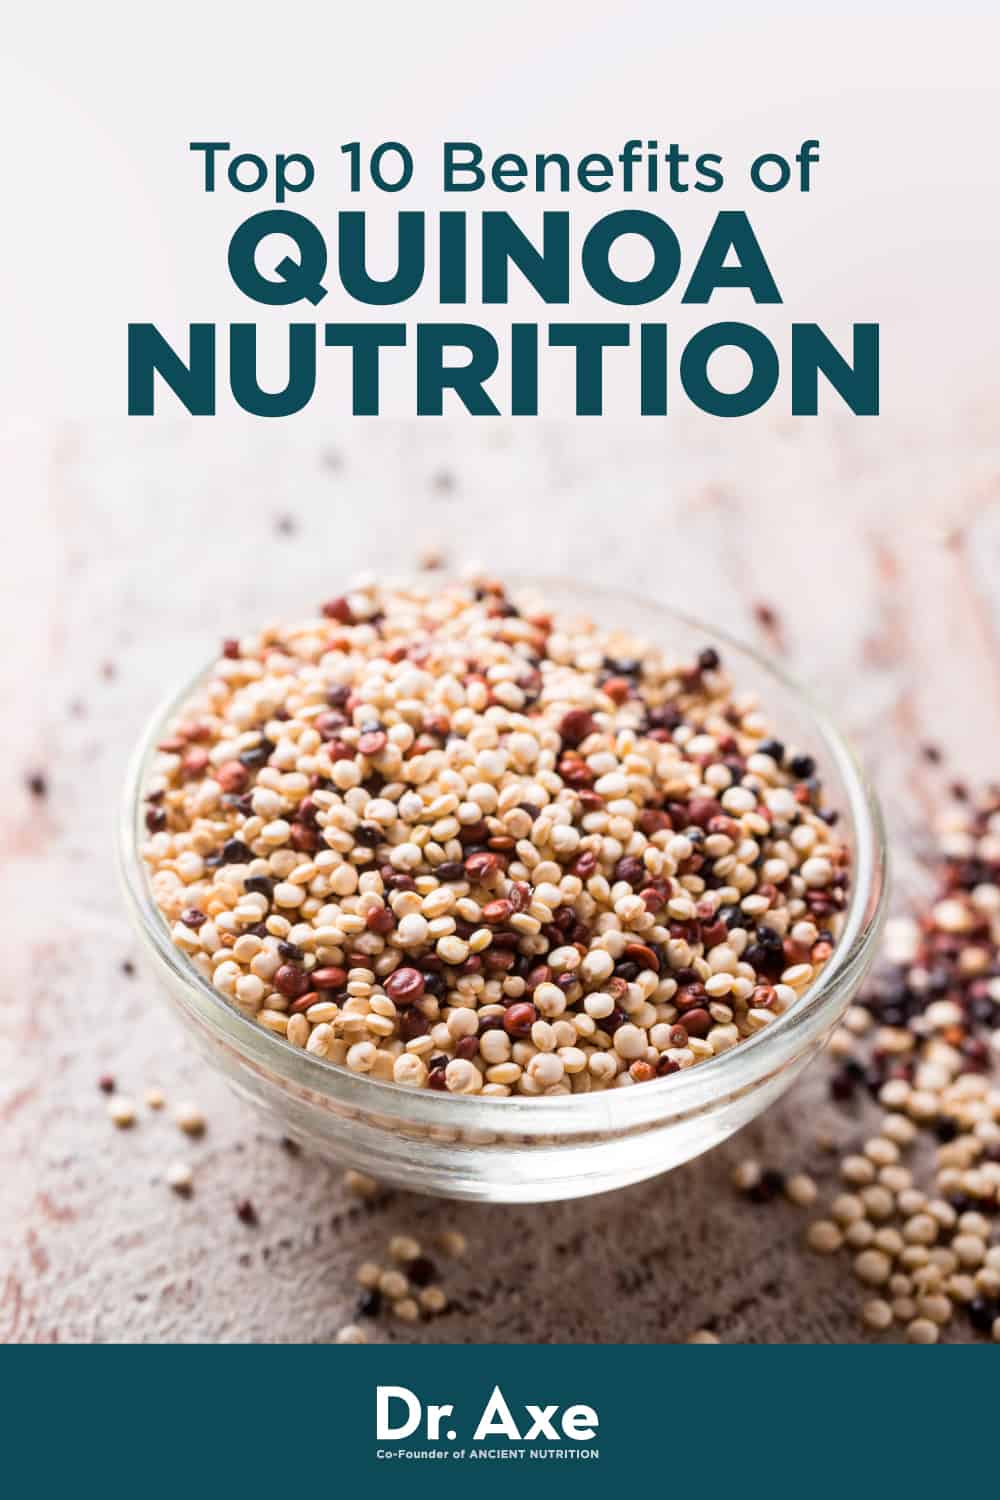 Quinoa Nutrition, Benefits and How to Cook - Dr. Axe